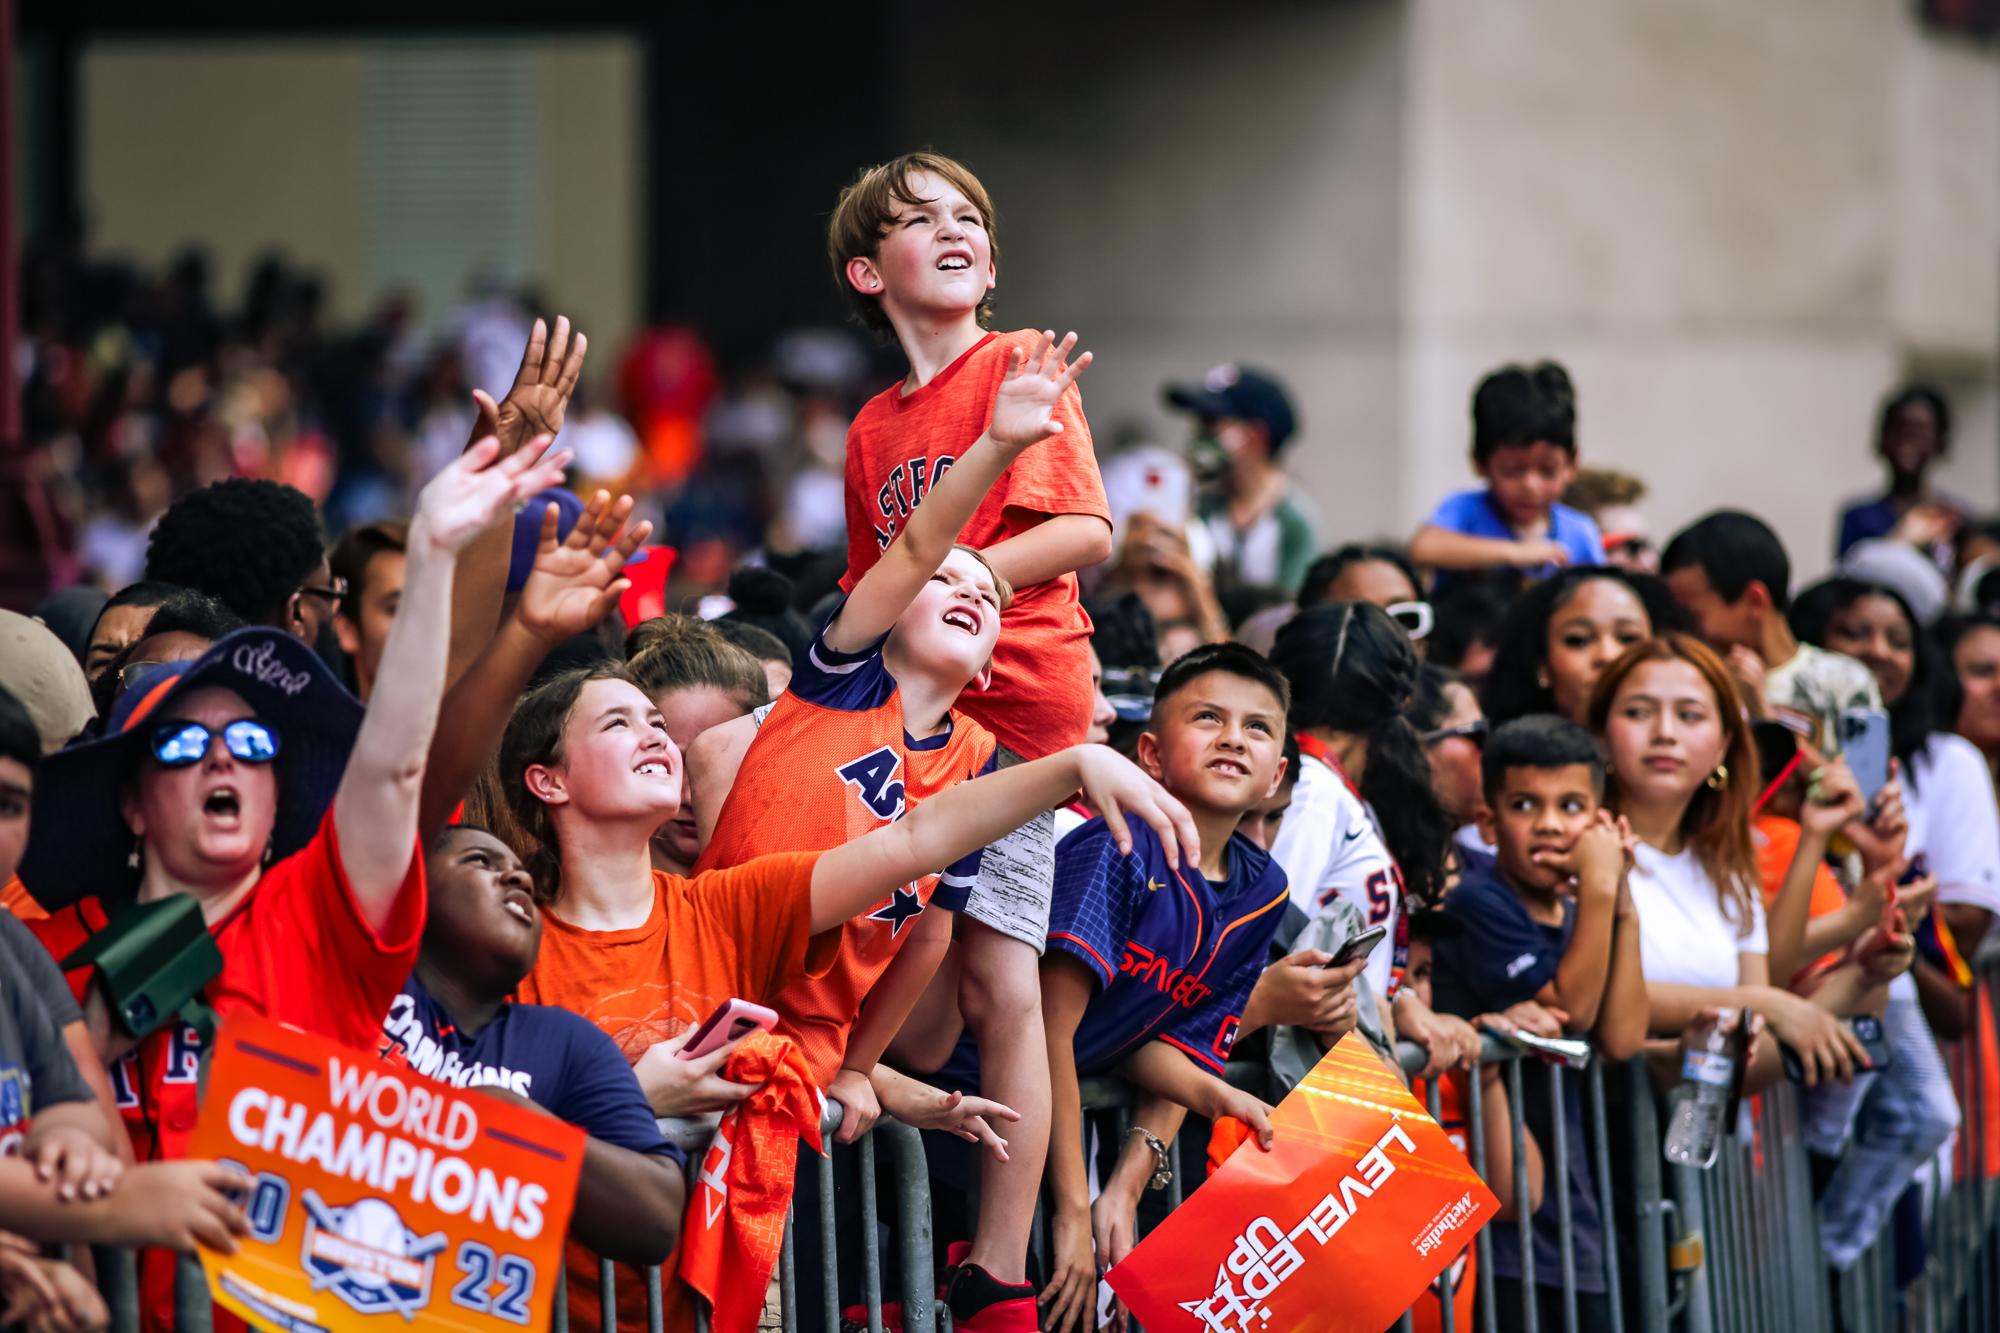 Here's what to know about the Houston Astros World Series championship  downtown parade - CultureMap Houston